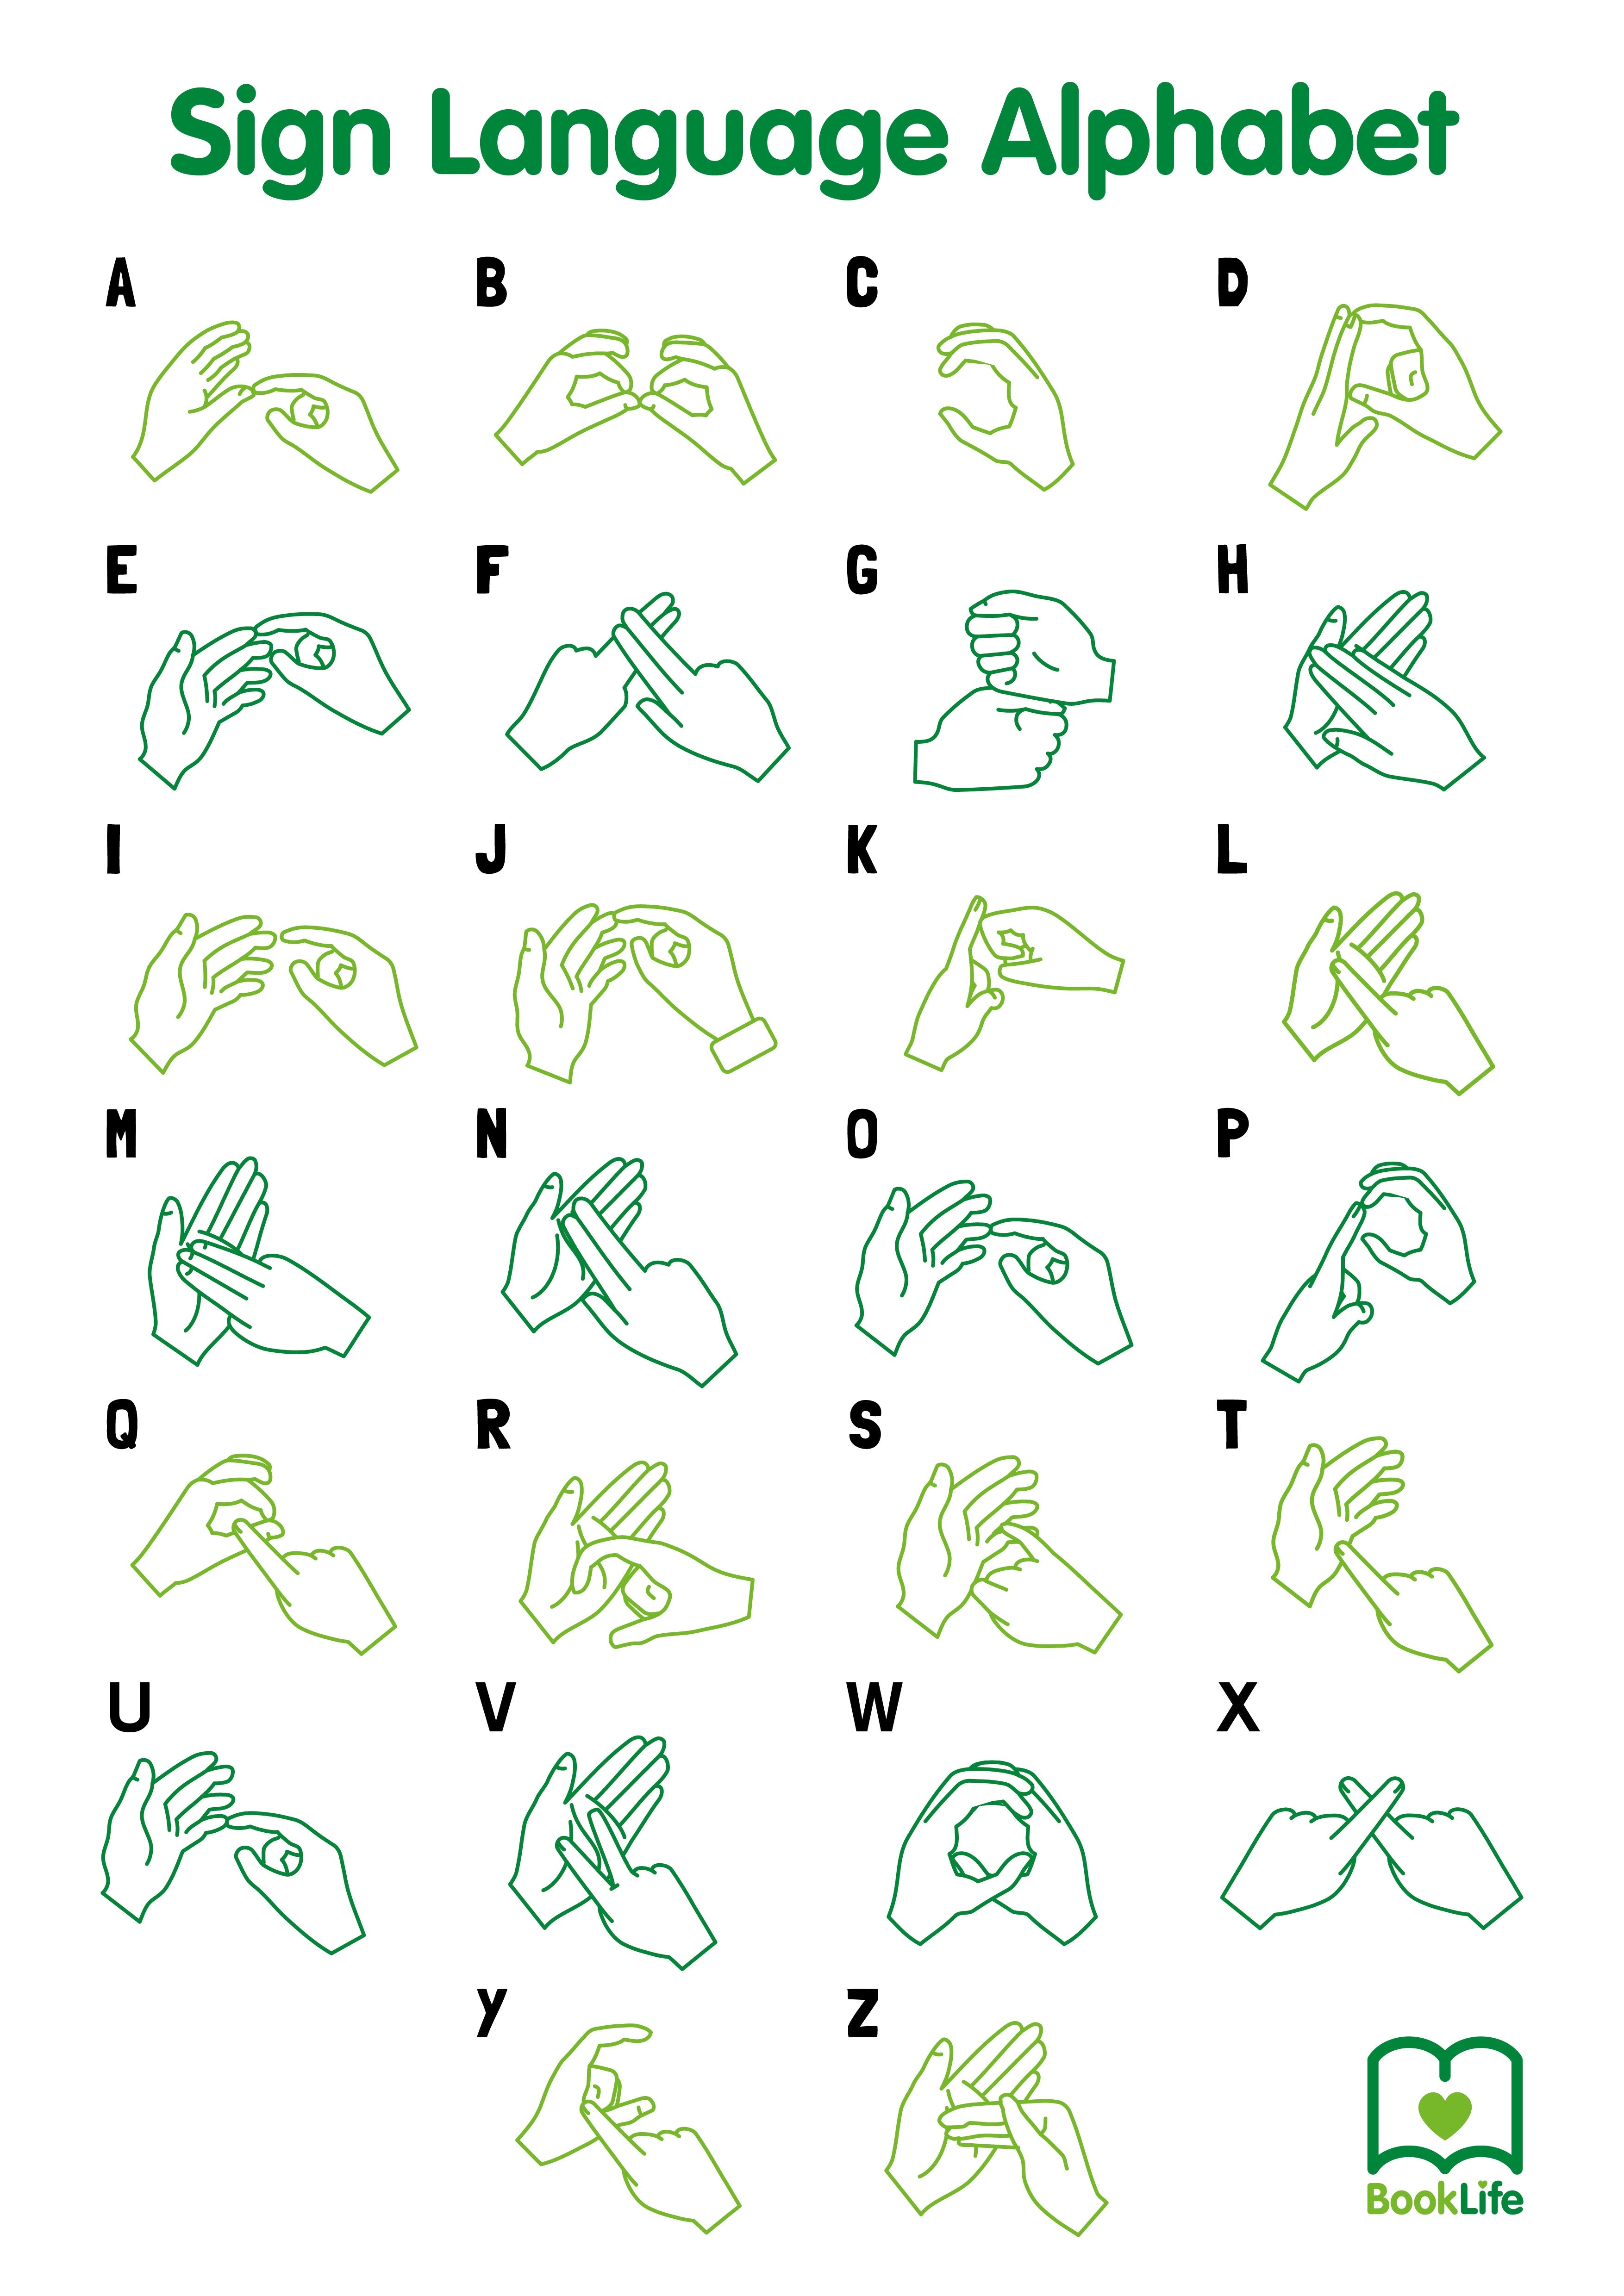 Free Sign Language Alphabet Poster by BookLife